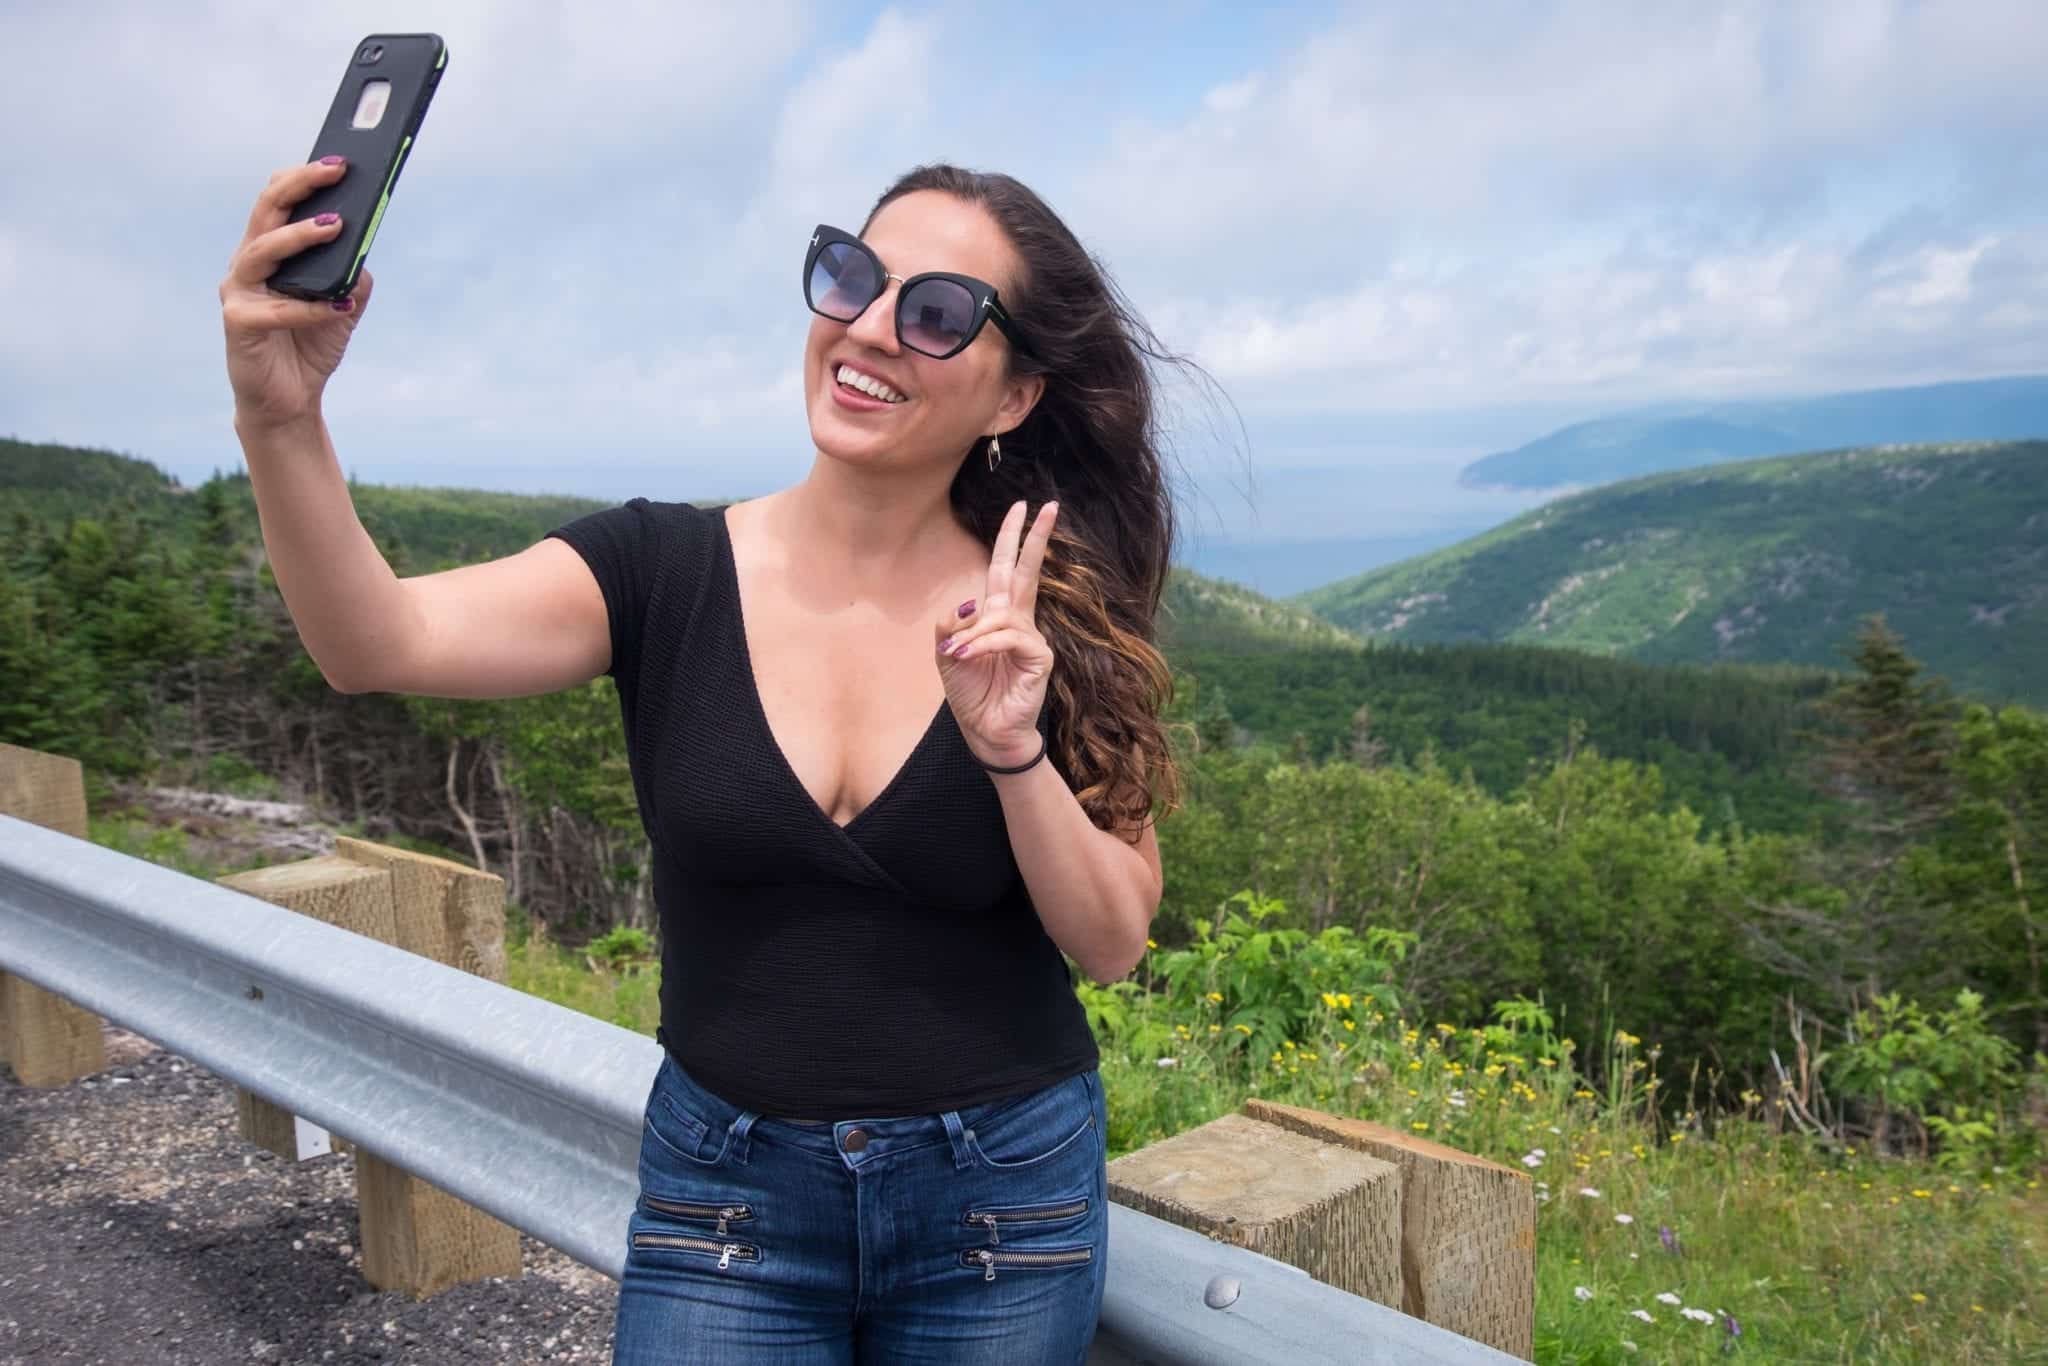 Kate wears large sunglasses and takes a selfie in front of hills and oceans at Cape Breton Highlands National Park